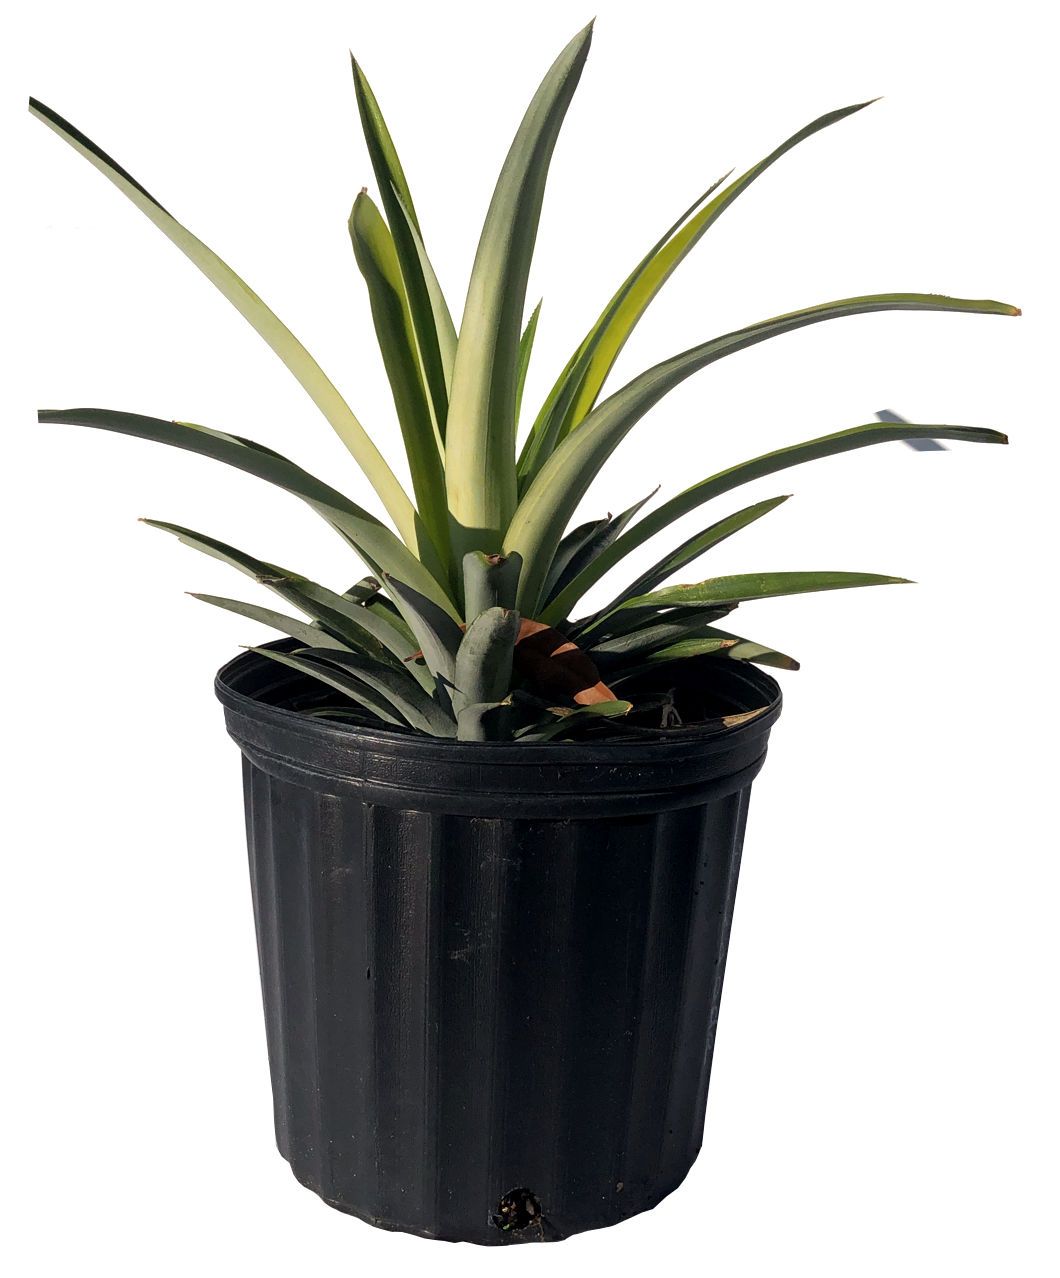 Pineapple Plant, 2 feet, 3-gal Container from Florida